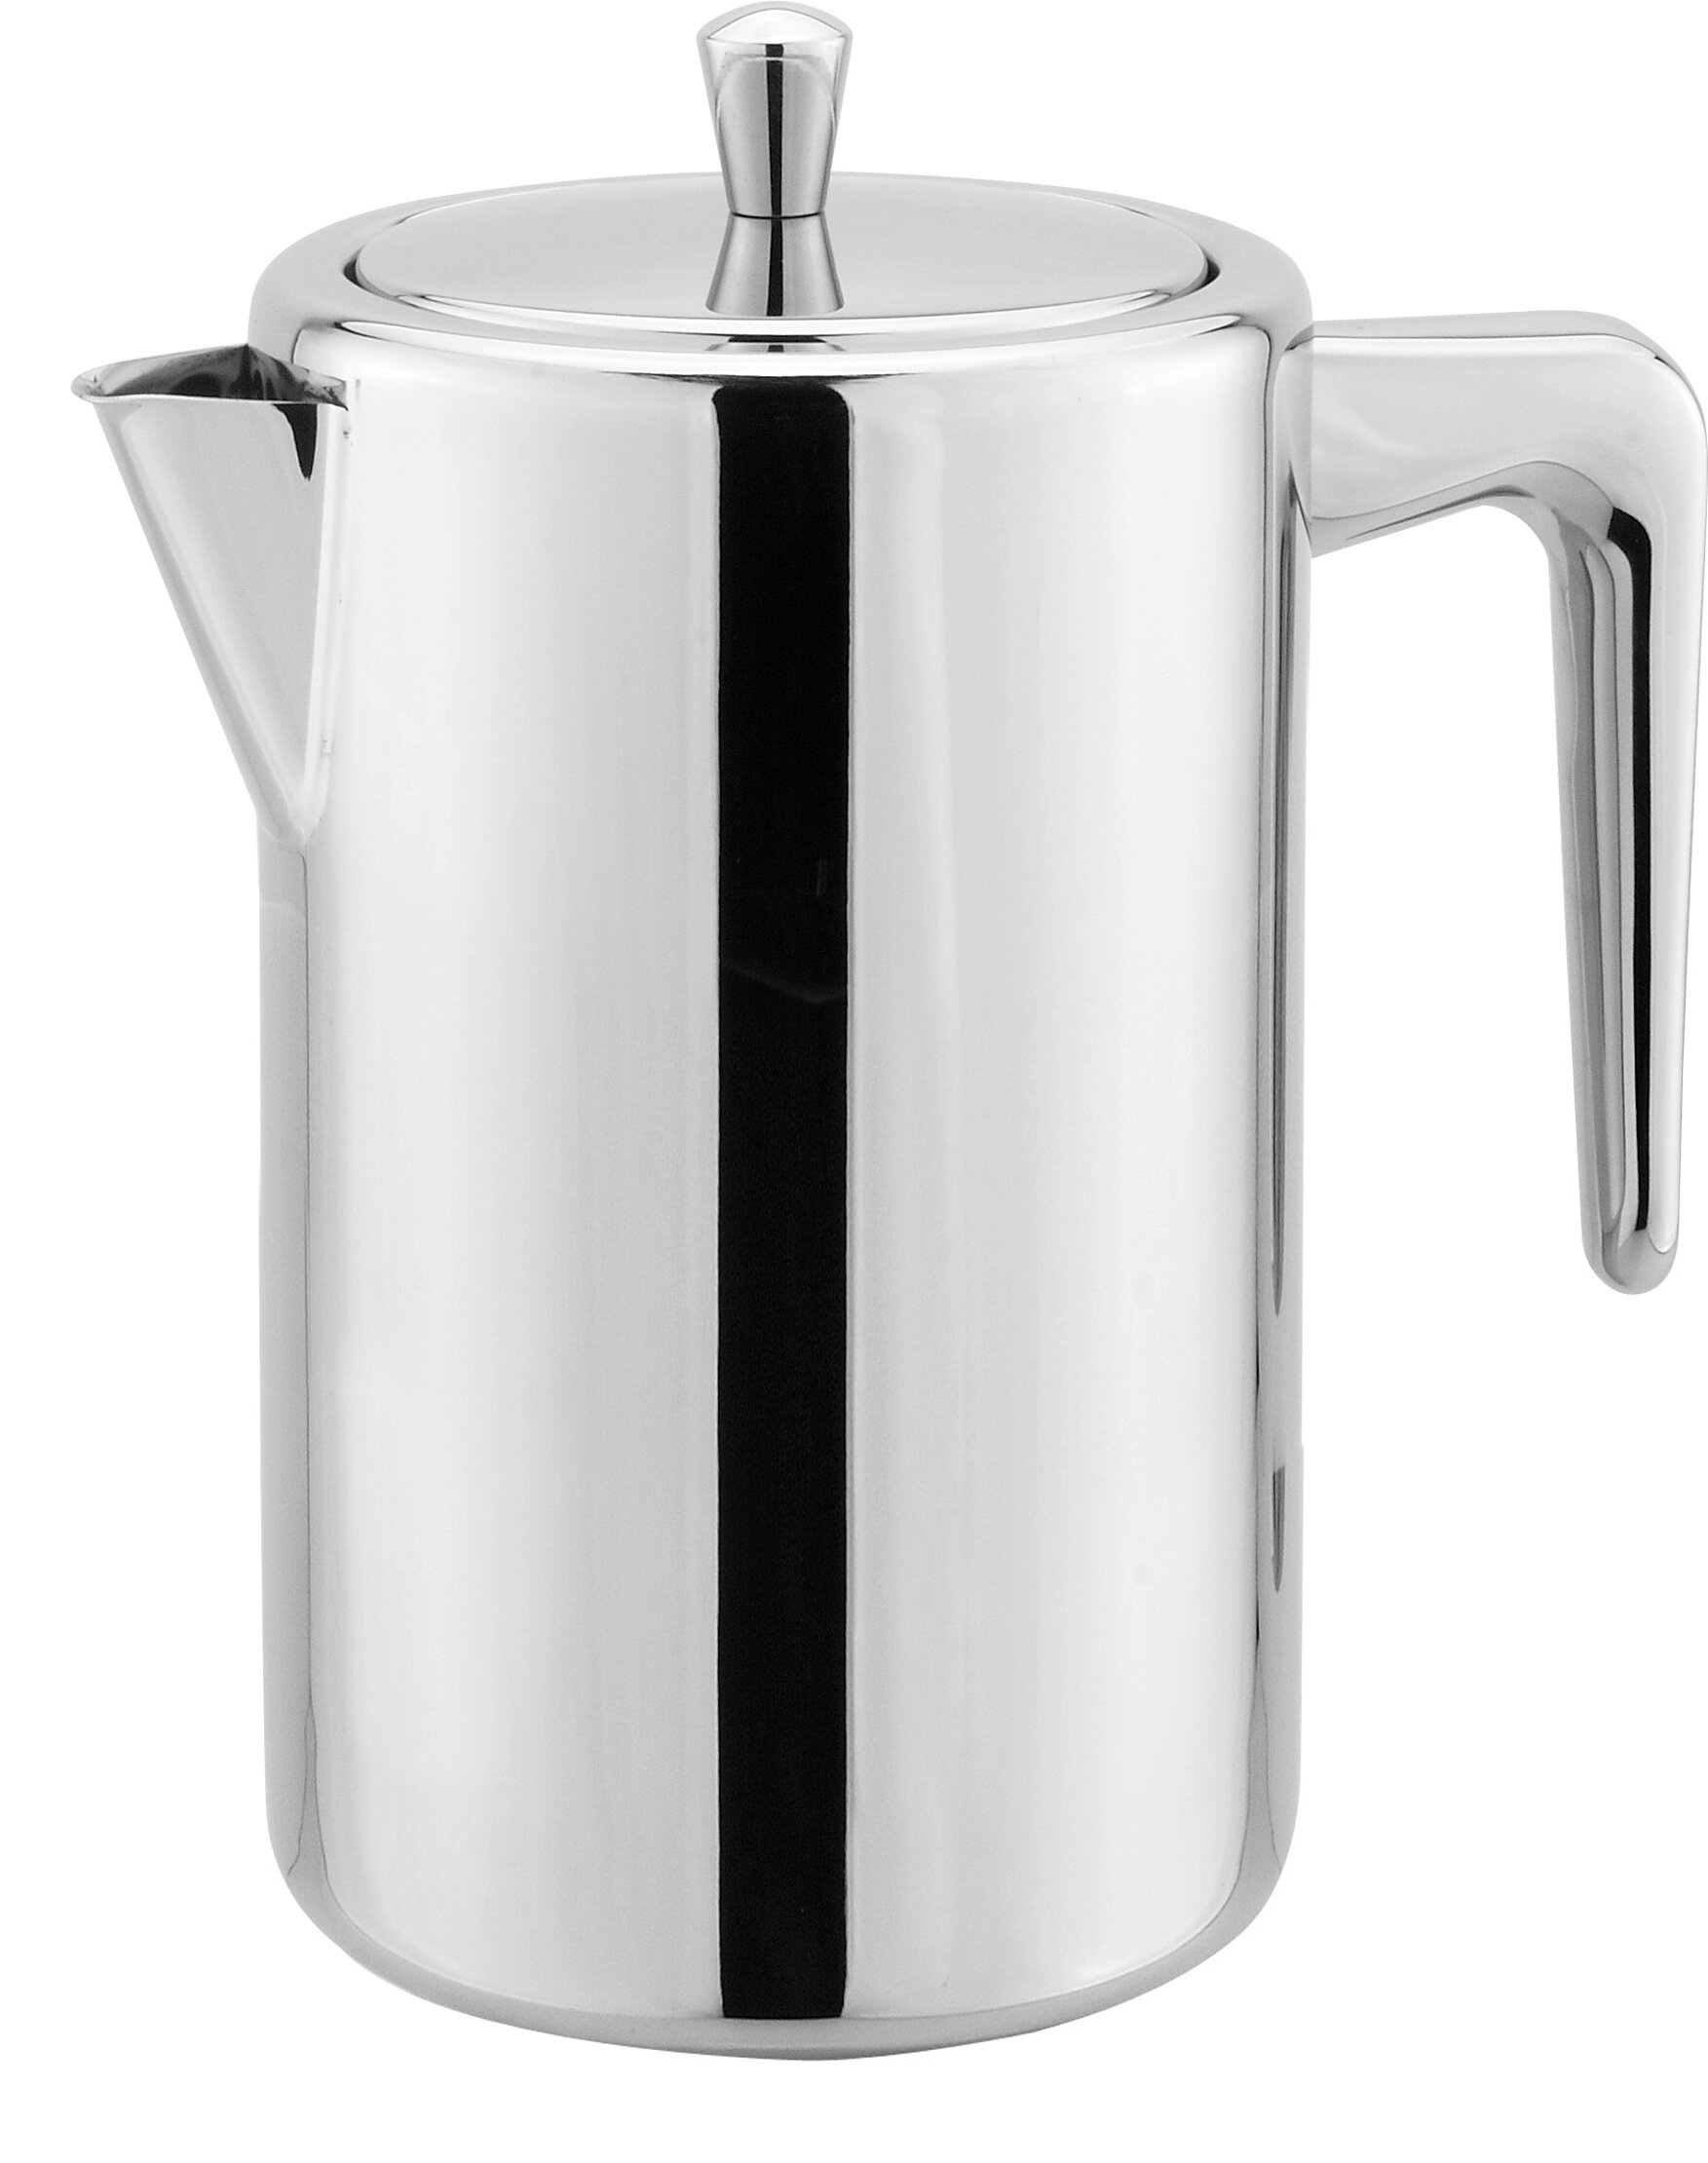  Bodum Columbia Thermal French Press Coffee Maker, Stainless  Steel, 34 Ounce, 1 Liter (8 cup),Silver: French Presses: Home & Kitchen